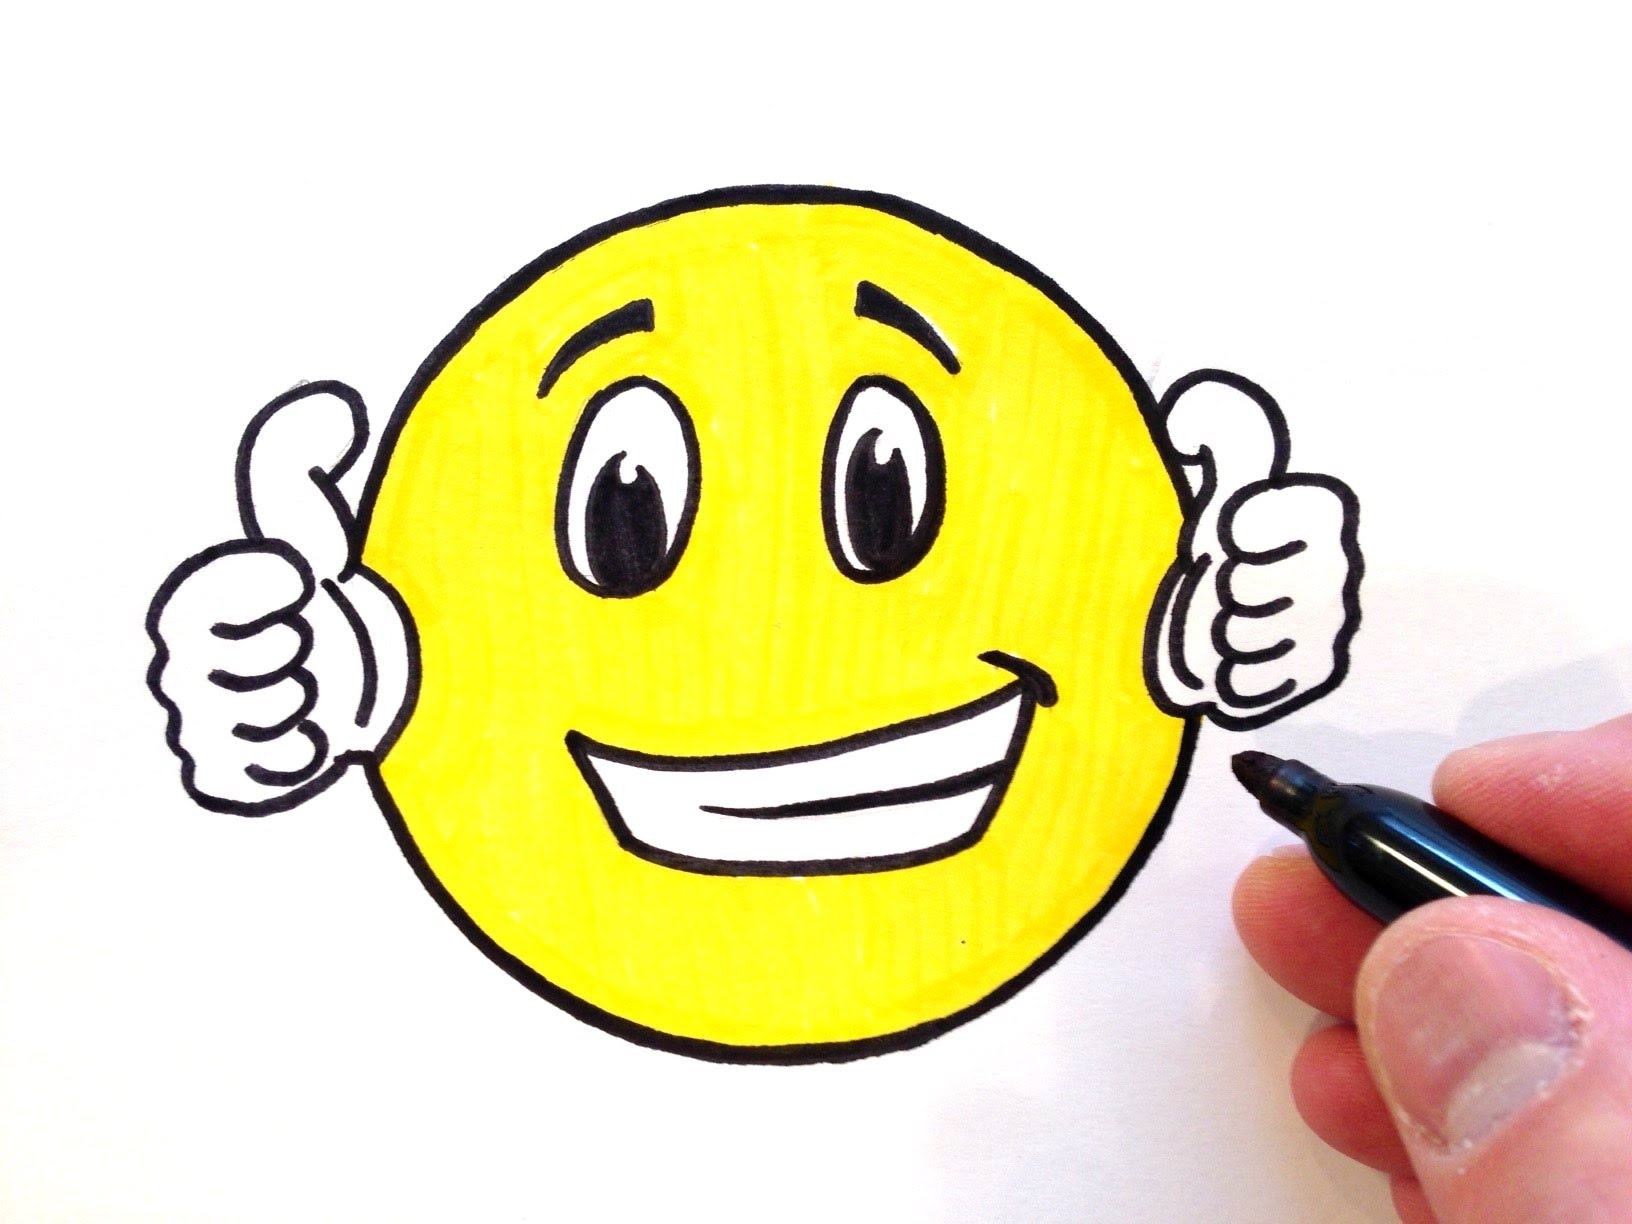 How to Draw a Thumbs Up Smiley Face - YouTube